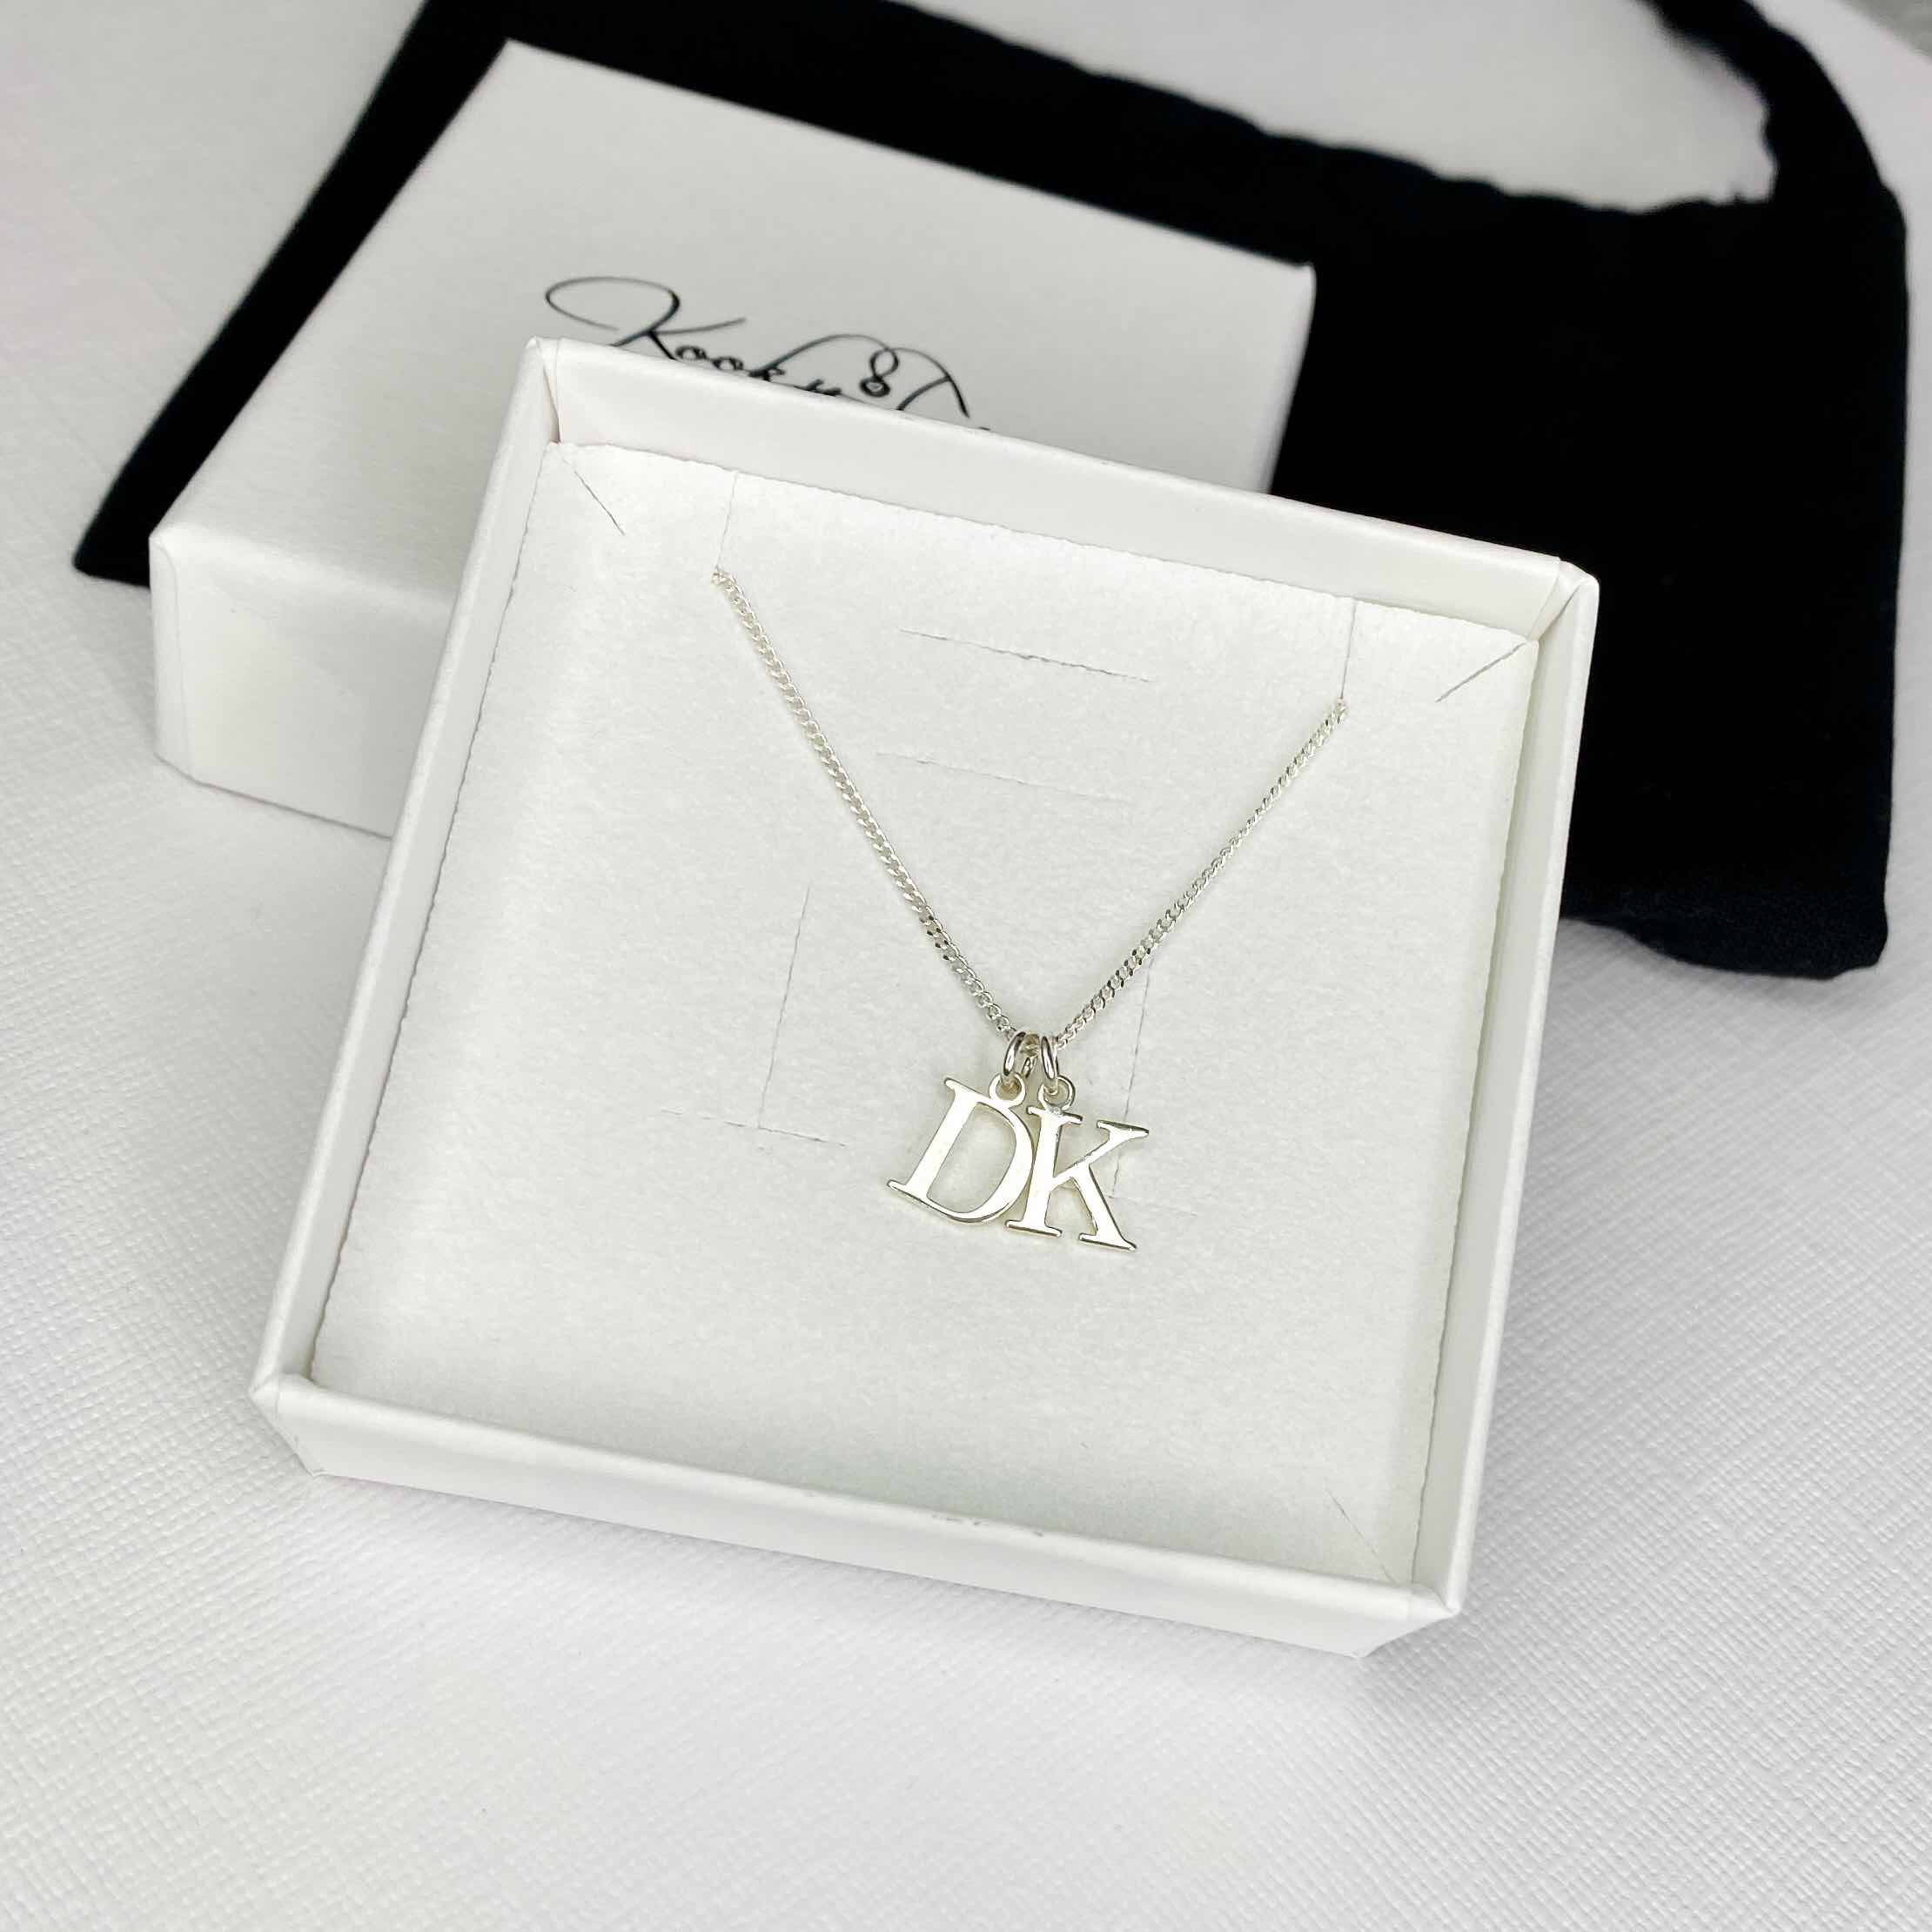 Christian Dior Letter Necklace  Farfetch